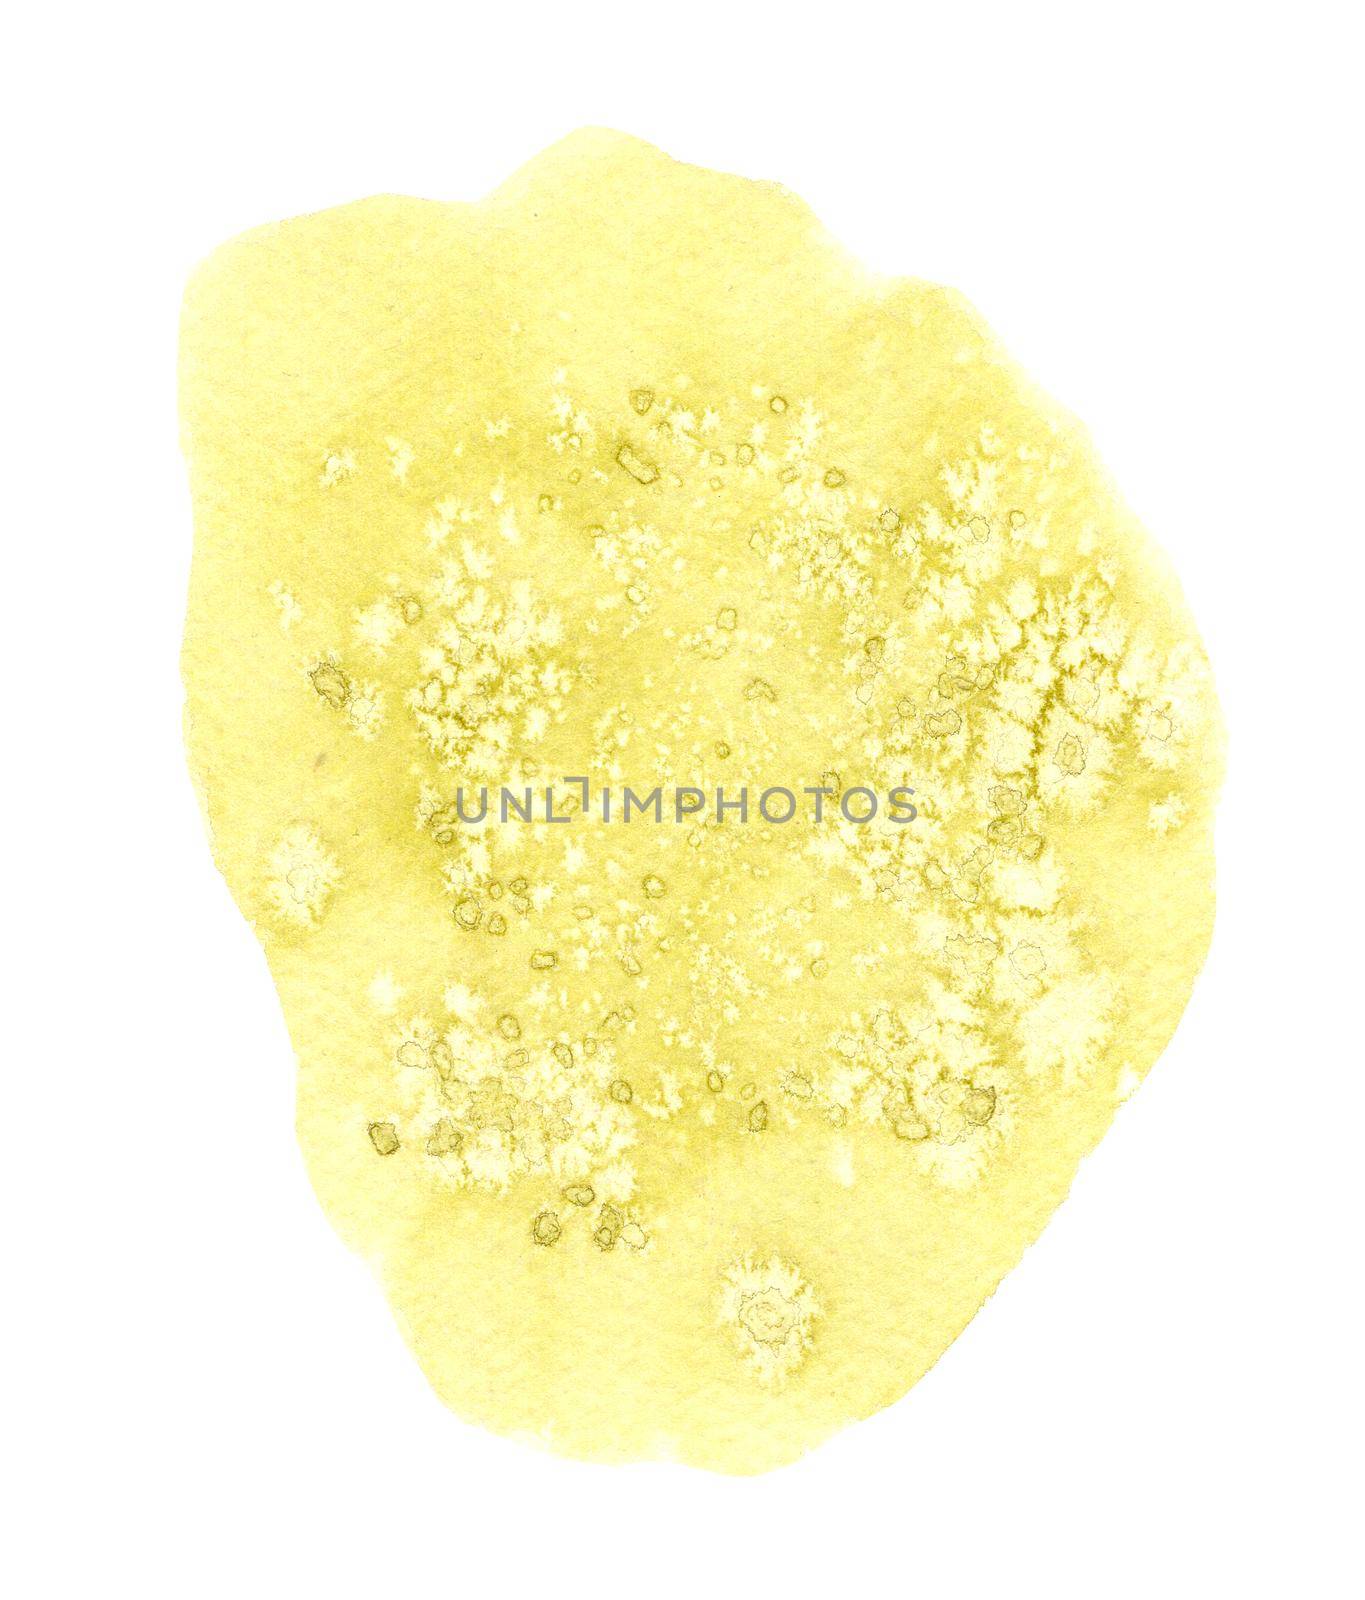 Watercolor yellow texture isolated on white background by dreamloud